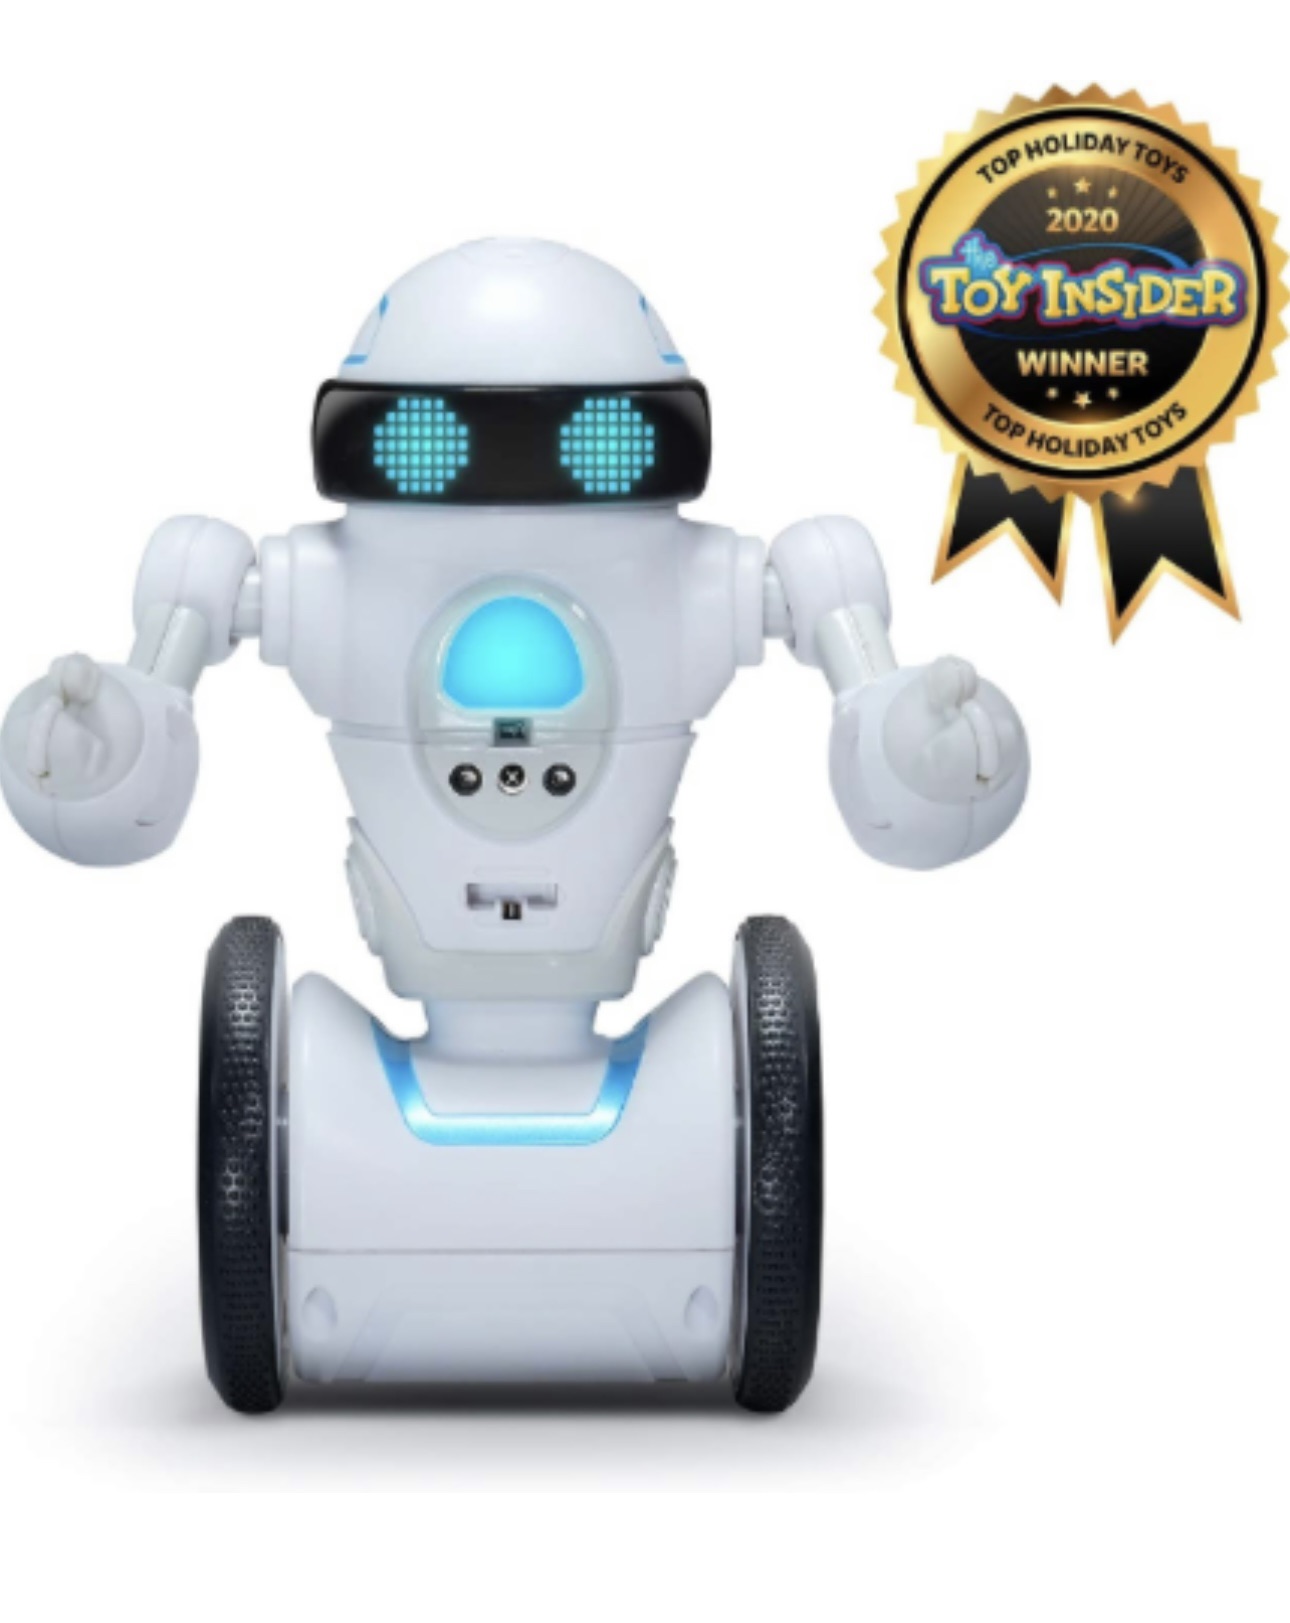 Amazon.com: WowWee MiP Arcade - Interactive Self-Balancing Robot - Play App-Enabled or Screenless Games with RC, Dancing & Multiplayer Modes : Toys & Games